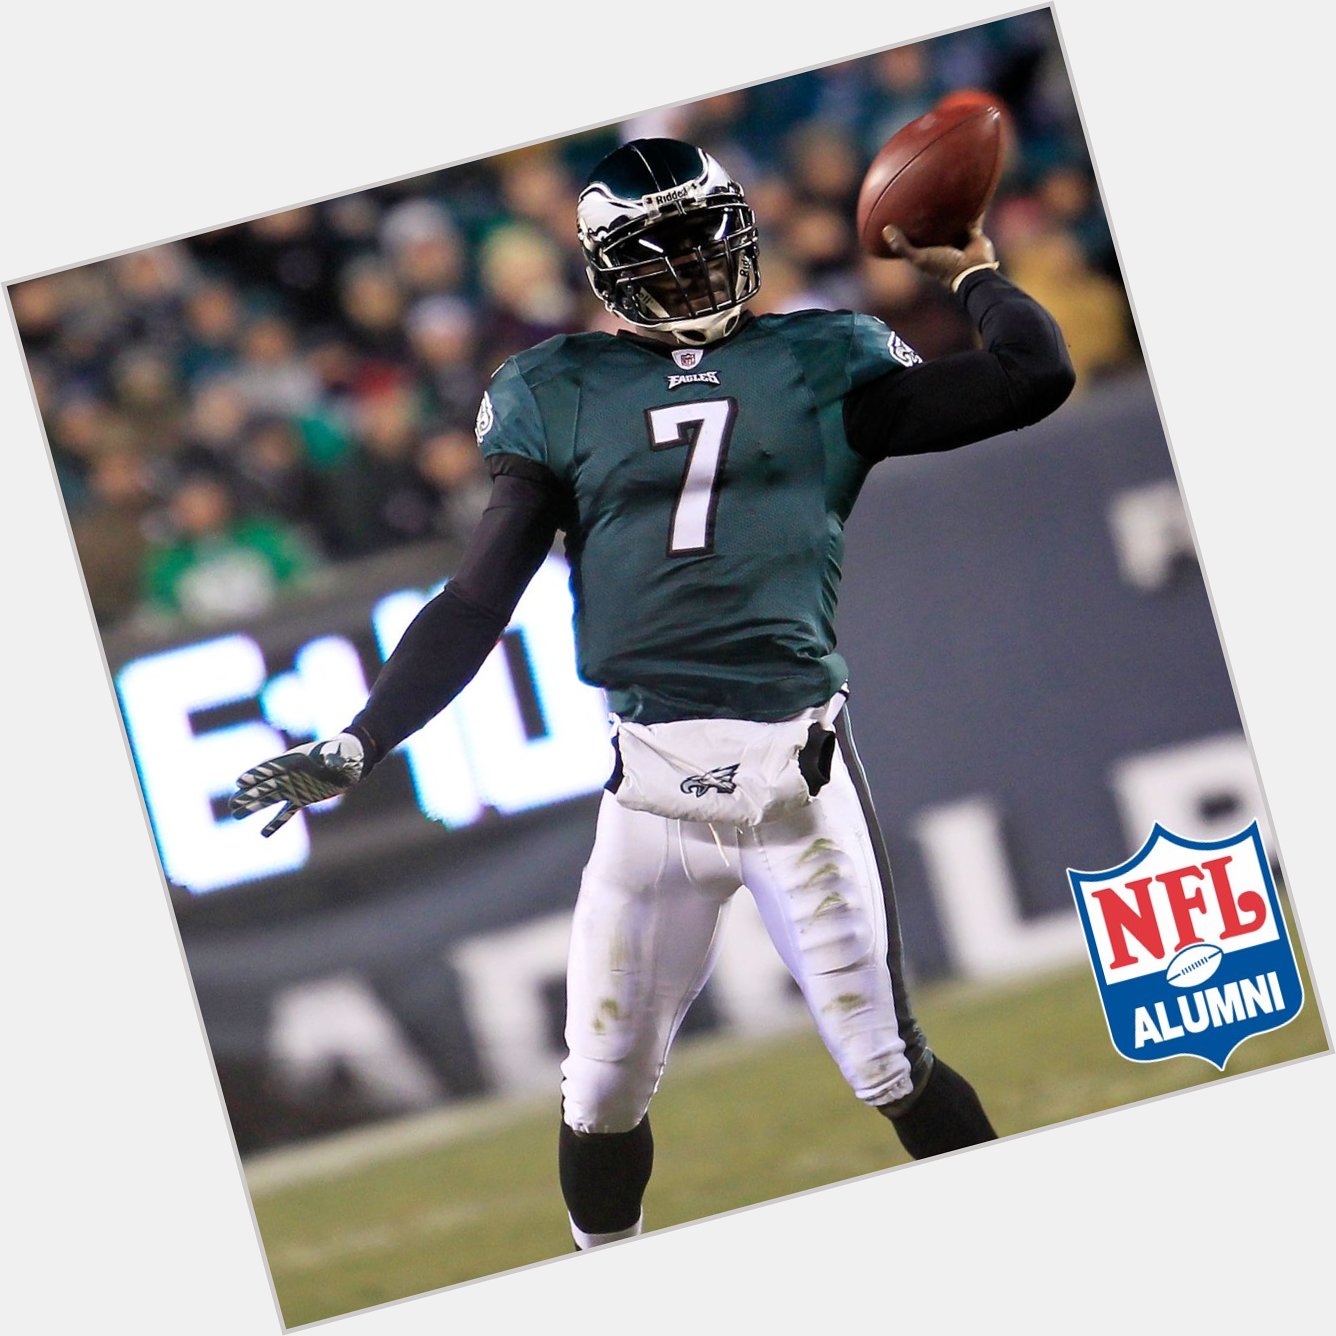 The NFLA wishes Michael Vick a Happy Birthday! 